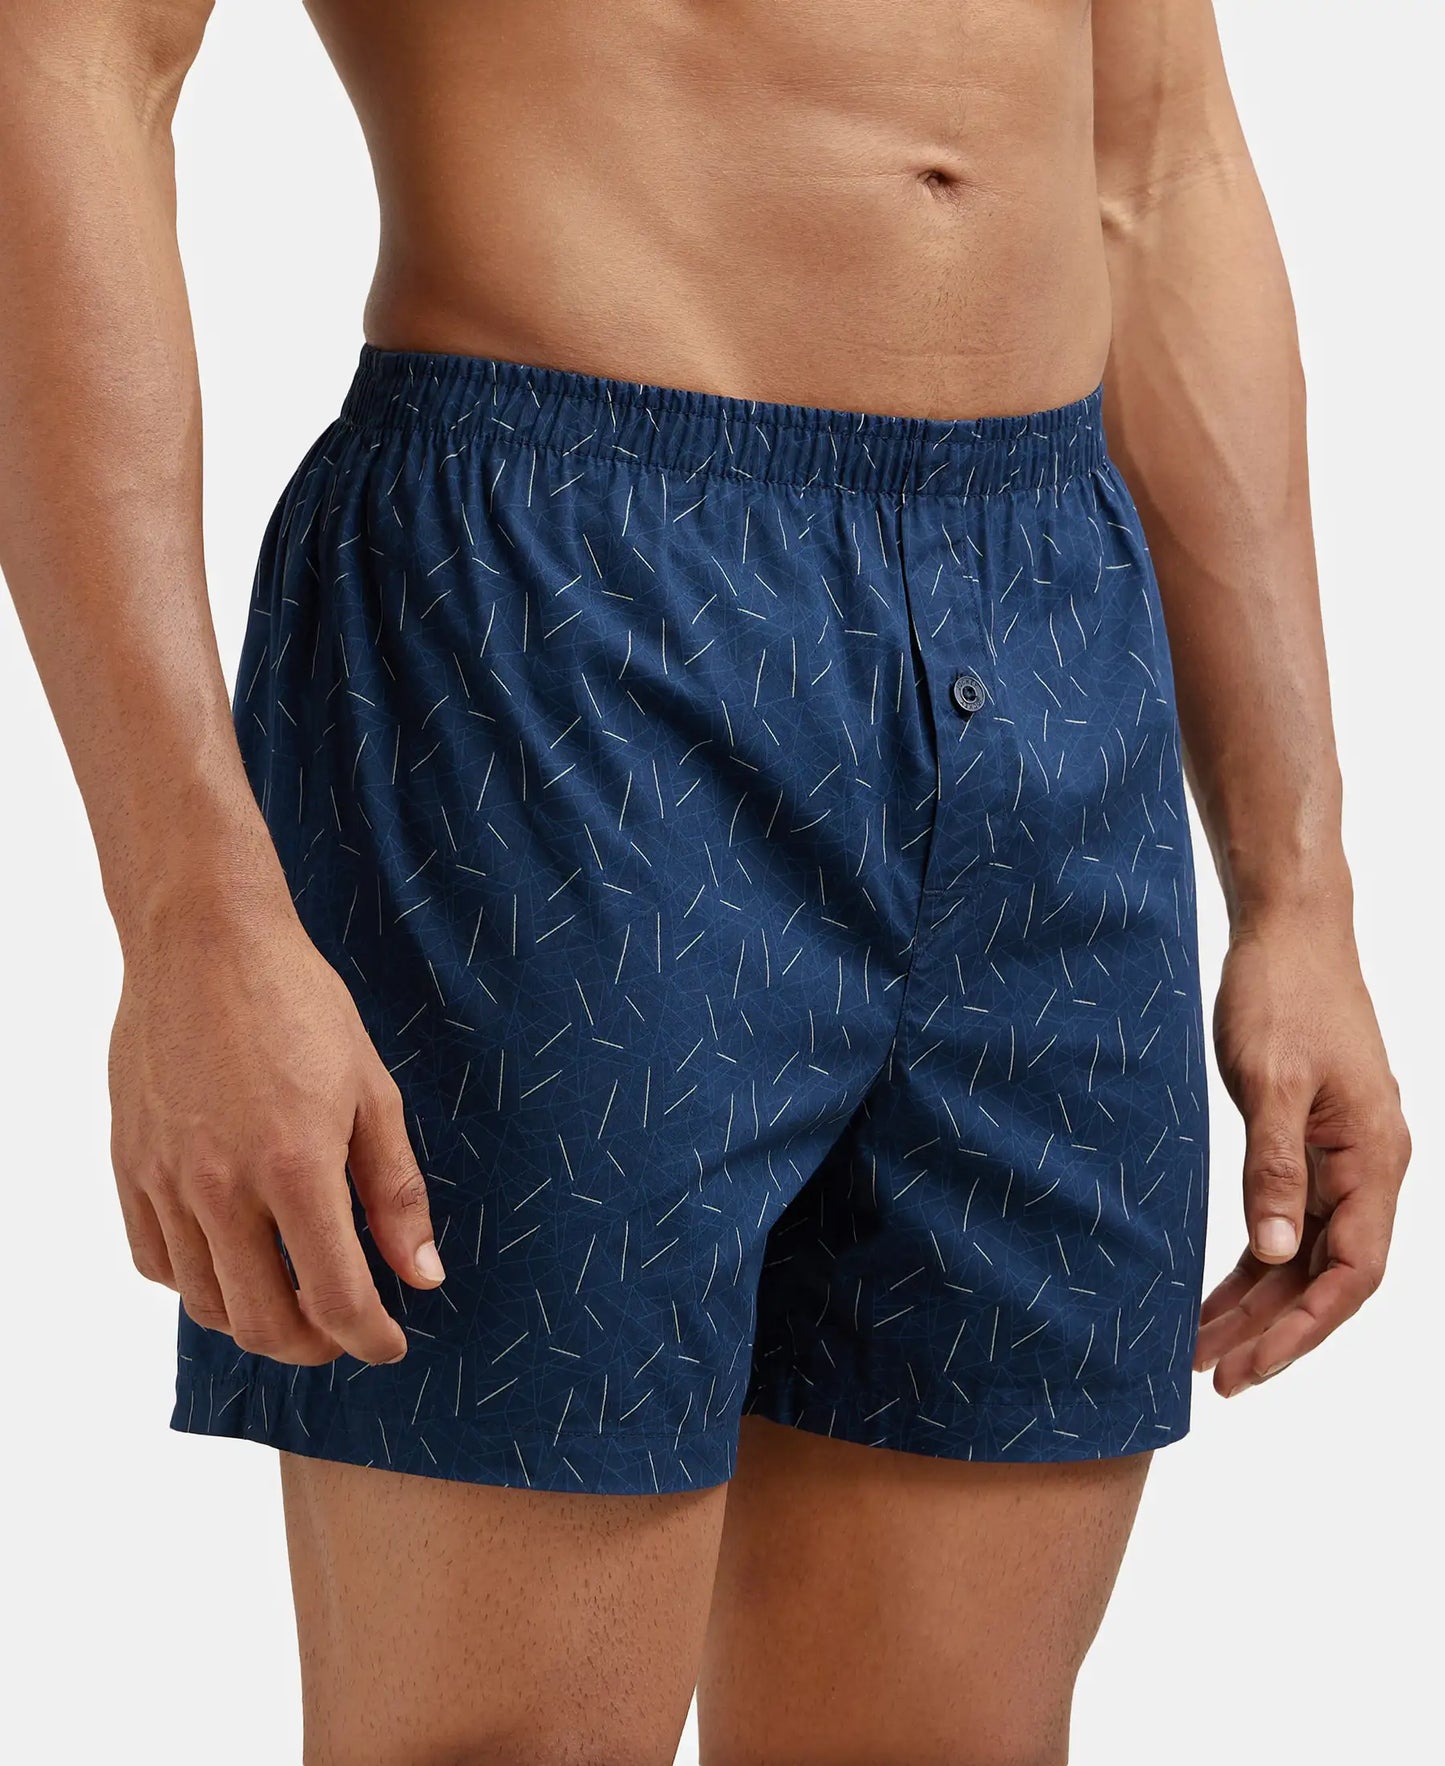 Super Combed Mercerized Cotton Woven Checkered Inner Boxers with Ultrasoft and Durable Inner Waistband - Black & Navy 3-4